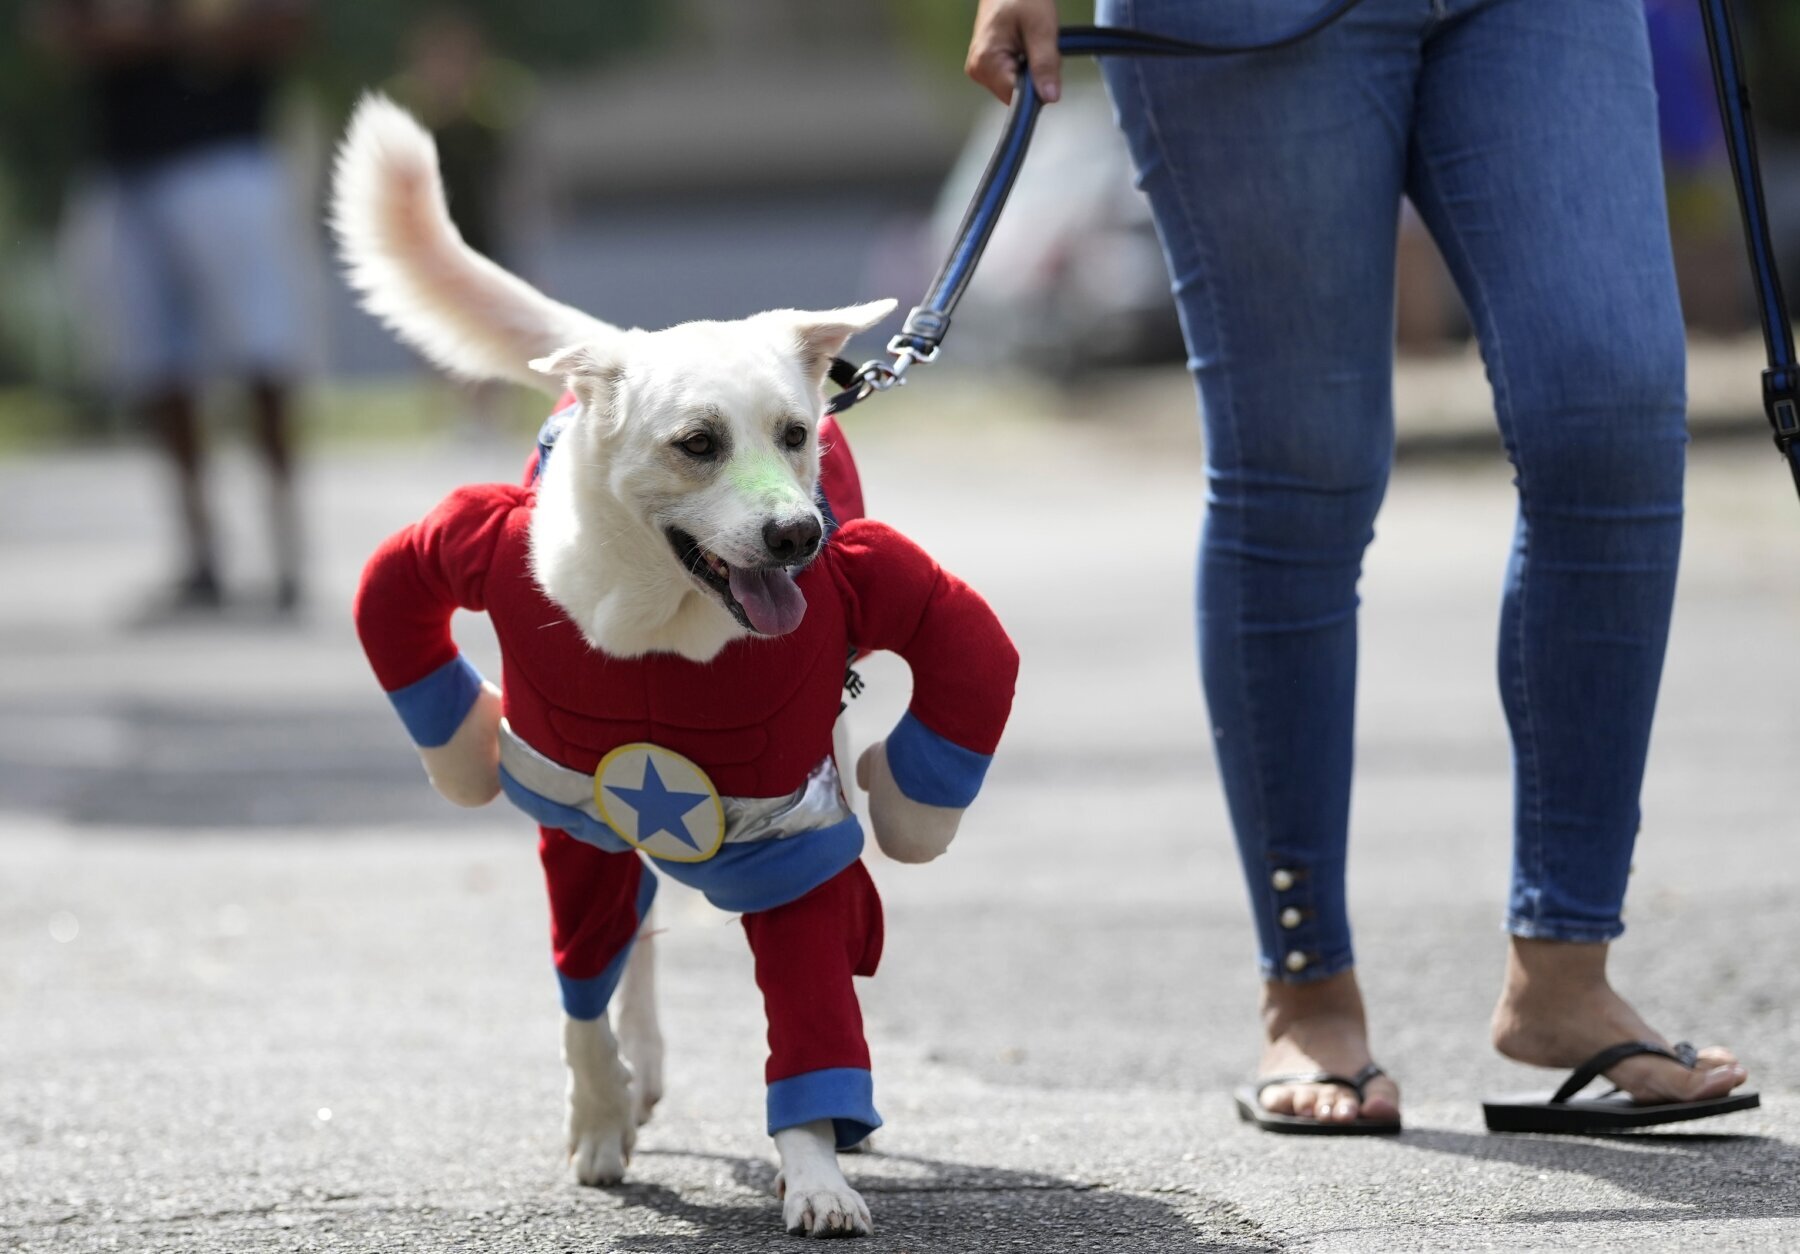 Dogs in costumes take over at Rio Carnival street party - WTOP News